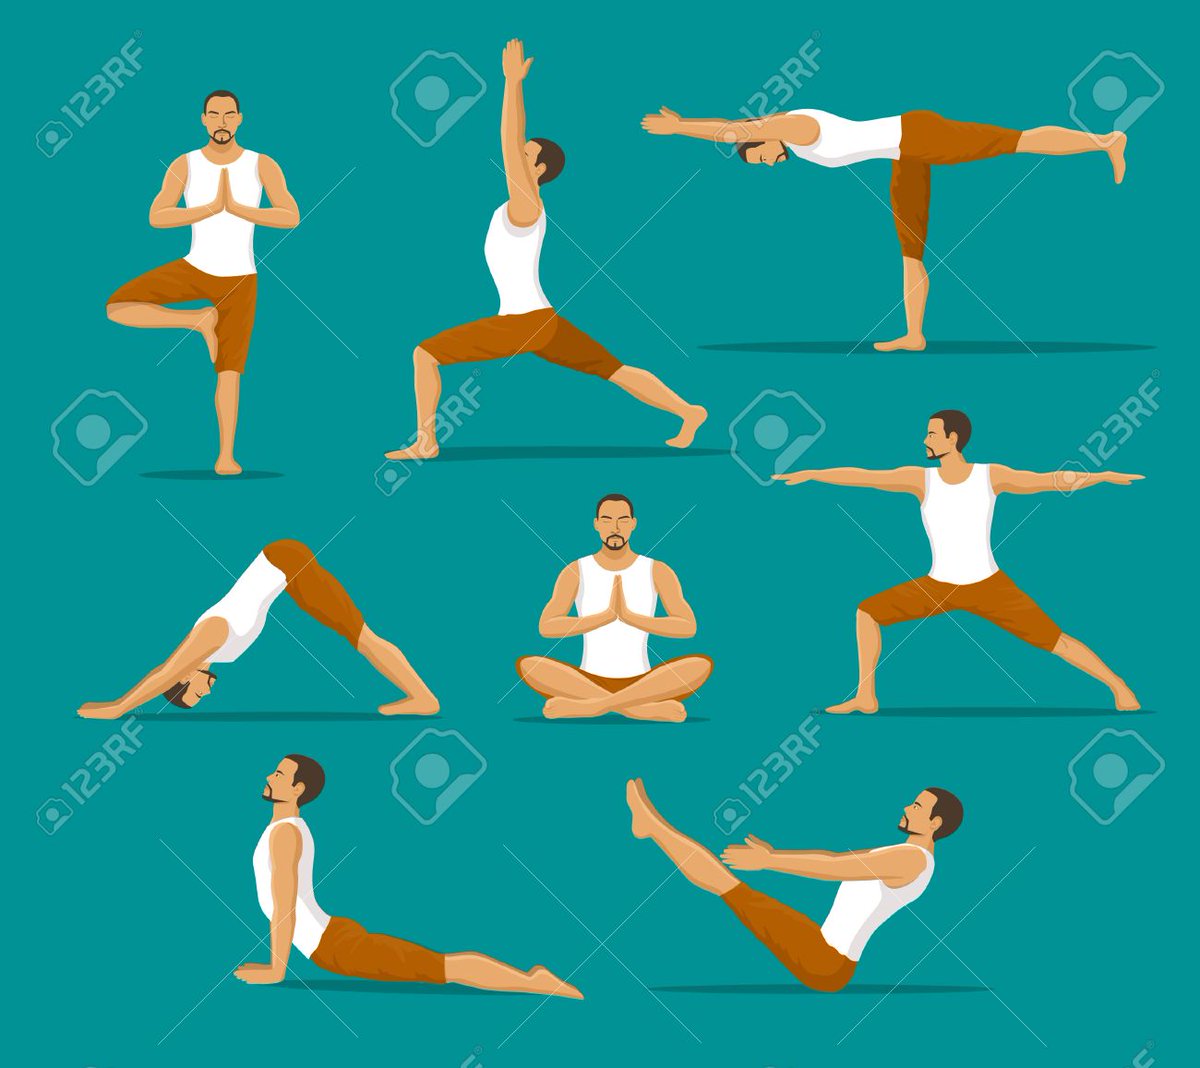 3) Asana :-  the postures practiced in yoga, comprise the third limb. In the yogic view, the body is a temple of spirit, the care of which is an important stage of our spiritual growth.